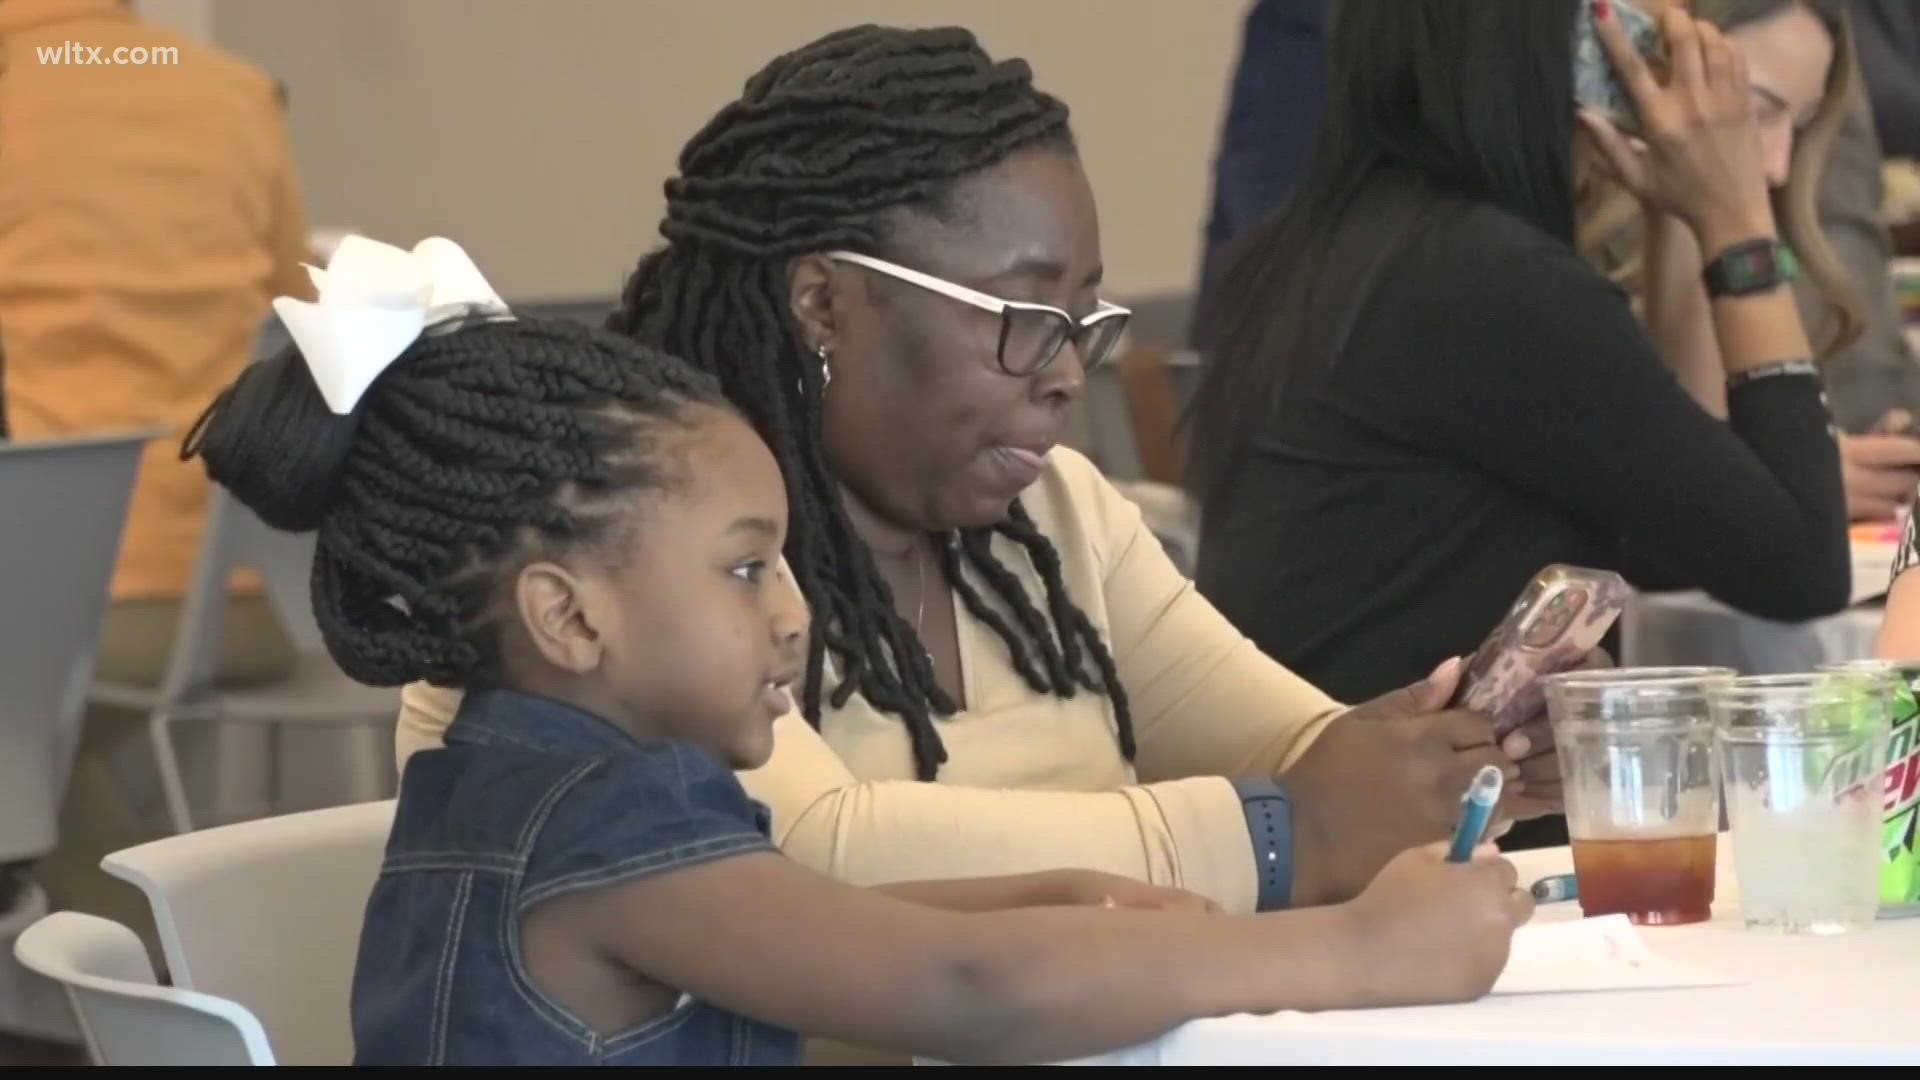 The district is part of an initiative called Waterford to held crack down on literacy rates, its been just a year since the program has been in use.